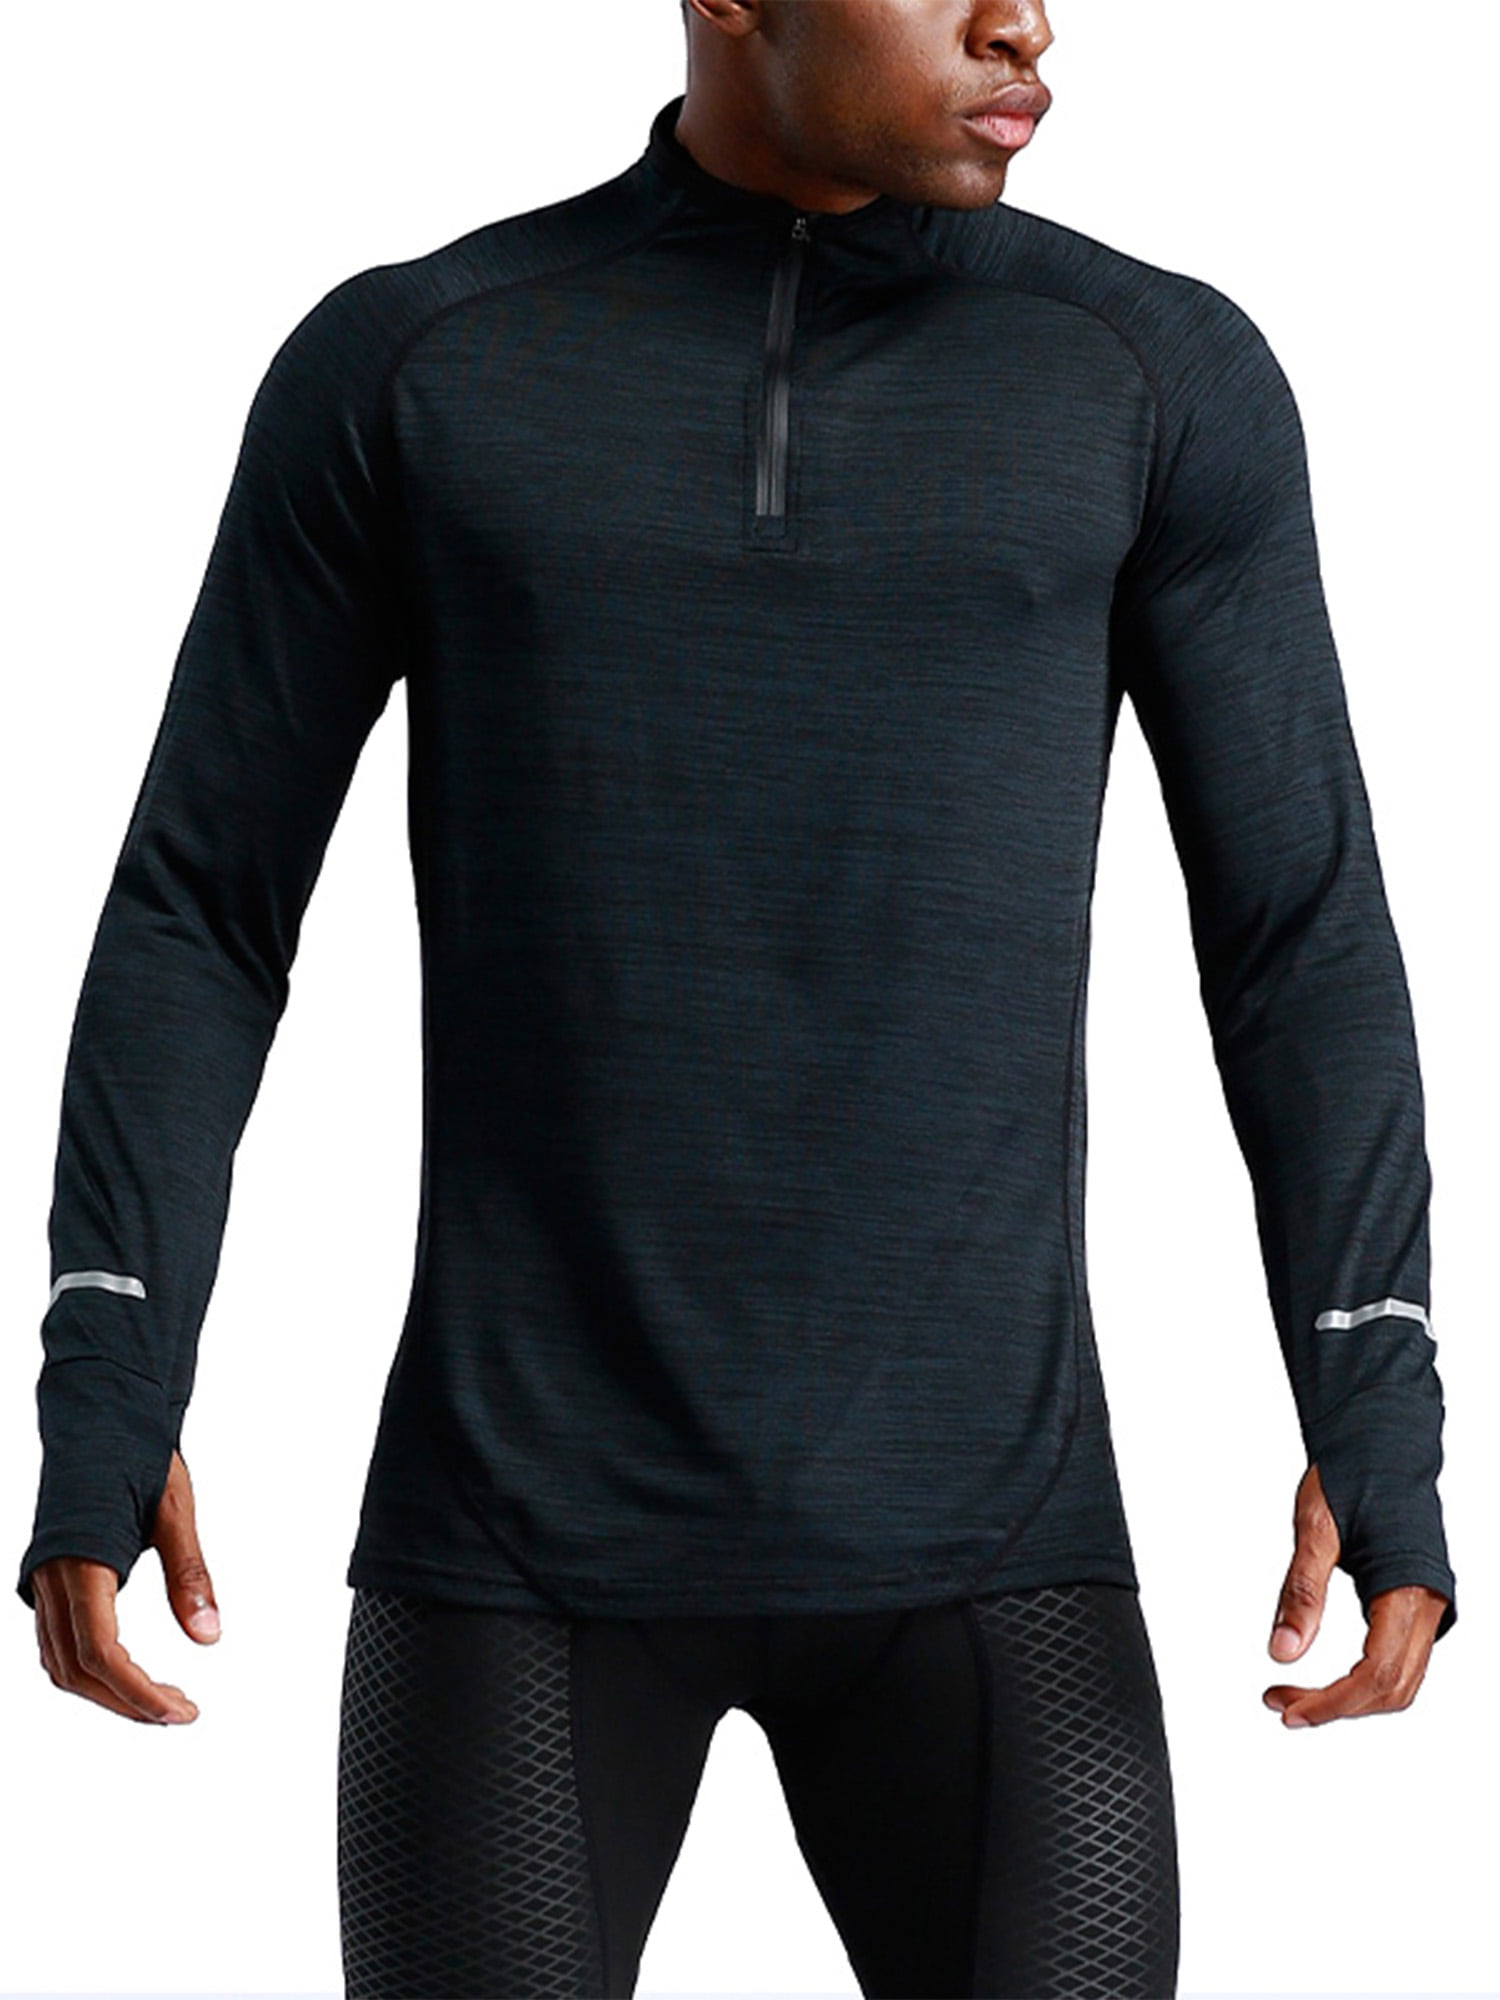 Sun Protect Tops Breathable Quick Dry Gym Fitness Jogging Base Layer Sportswear Hoodie donhobo Men's Running Long Sleeve Top Hoodie T-Shirt with Thumb Hole,UPF 50 